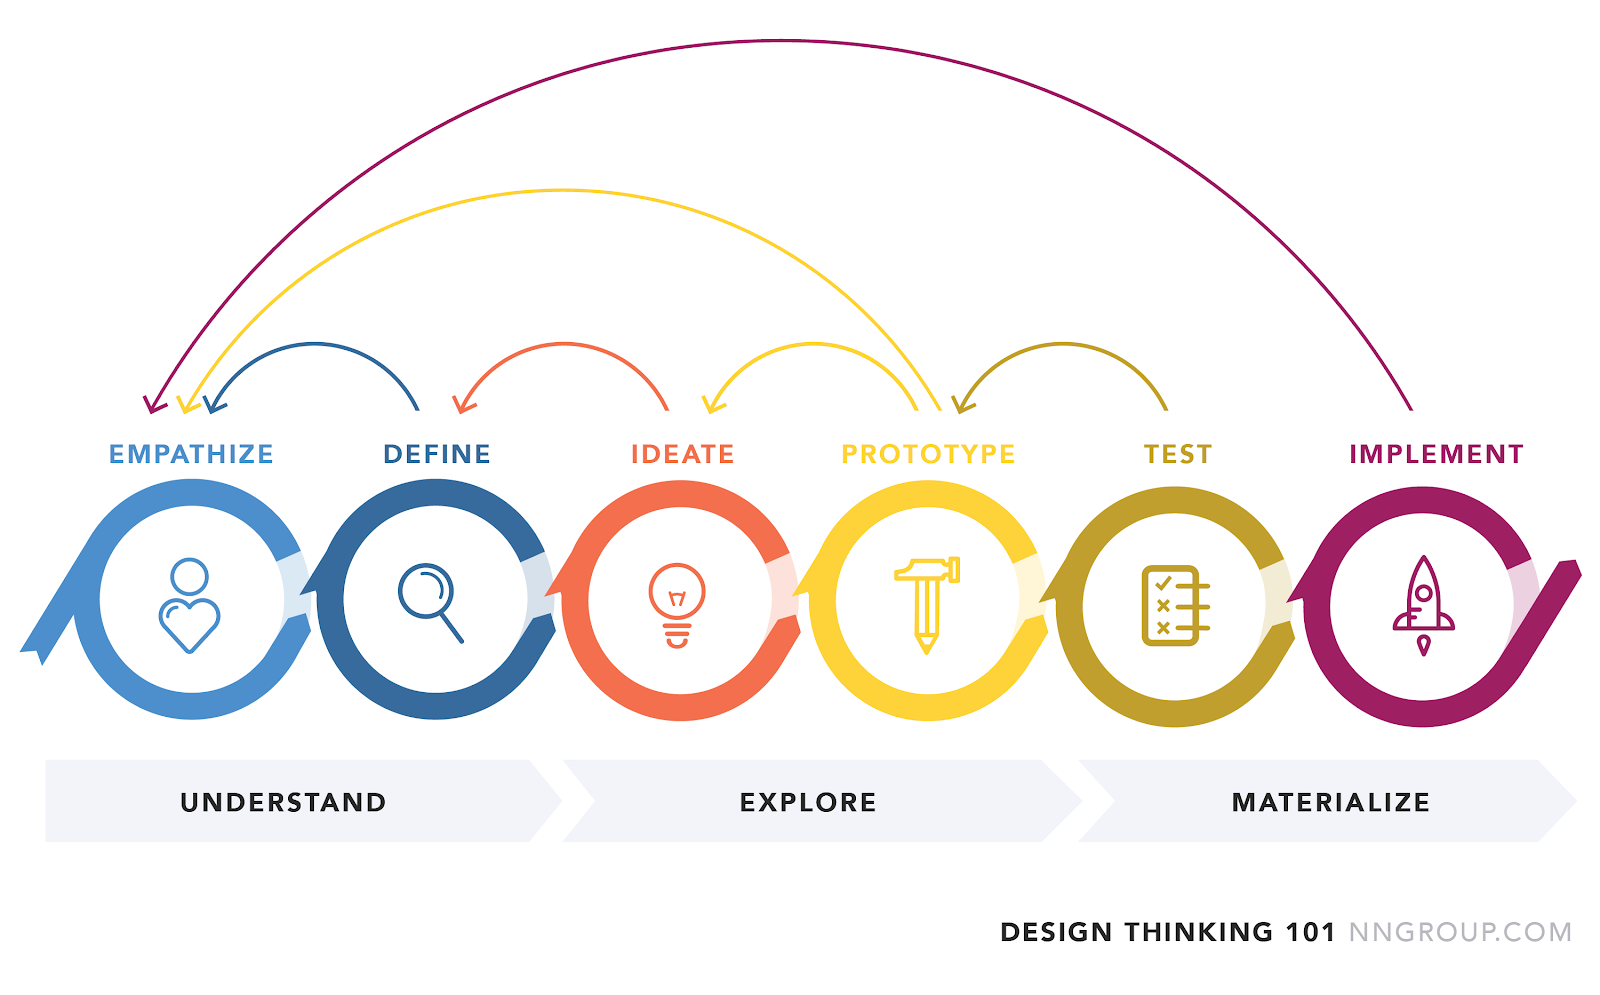 Iteration in the Design Thinking process: Understand, Explore, Materialize 